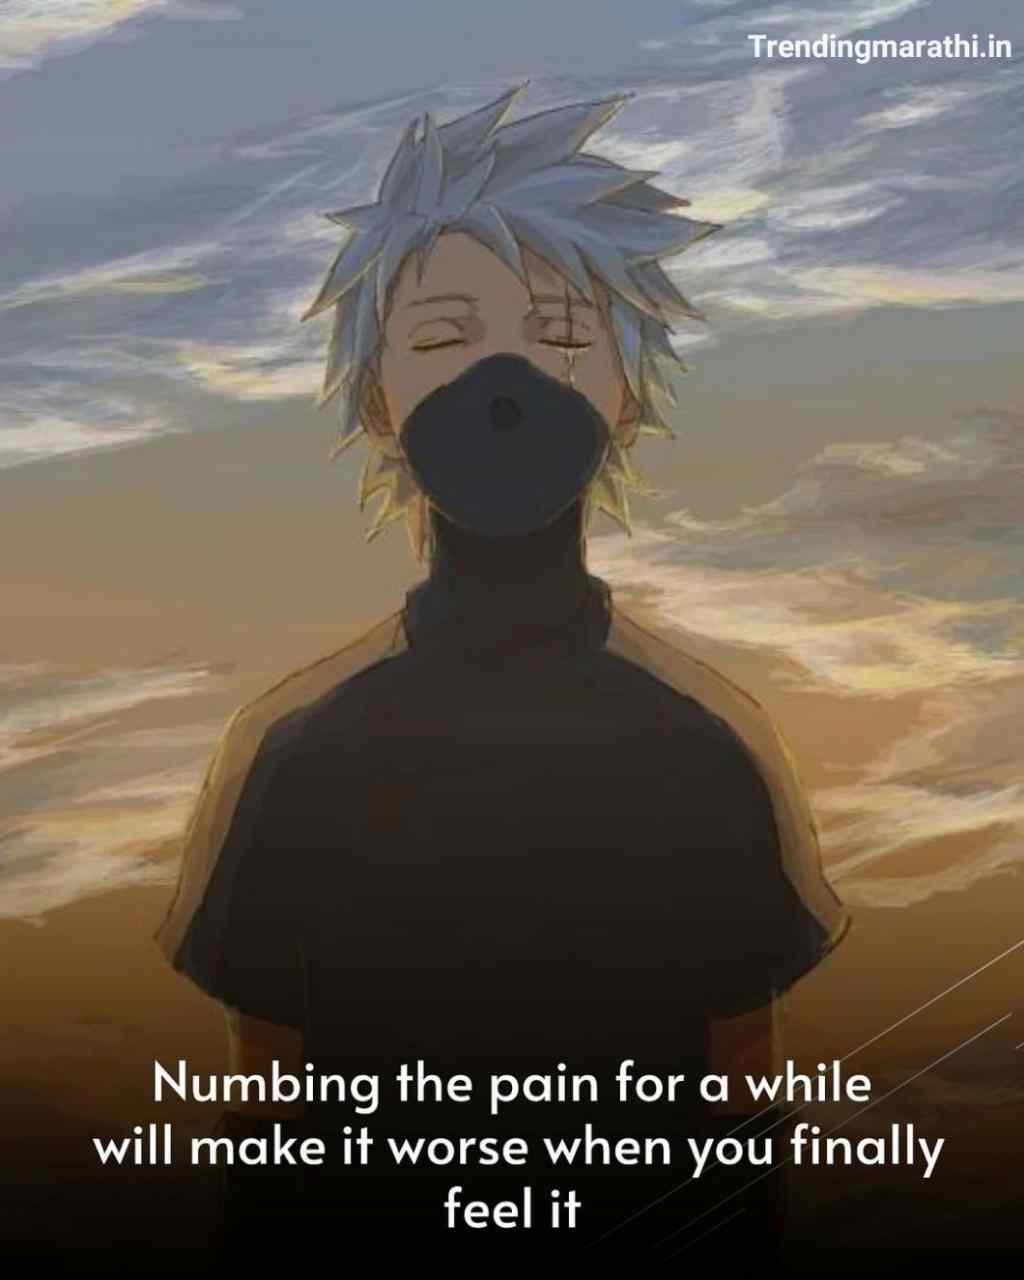 Best Anime Quotes of All Time Quote Wallpaper